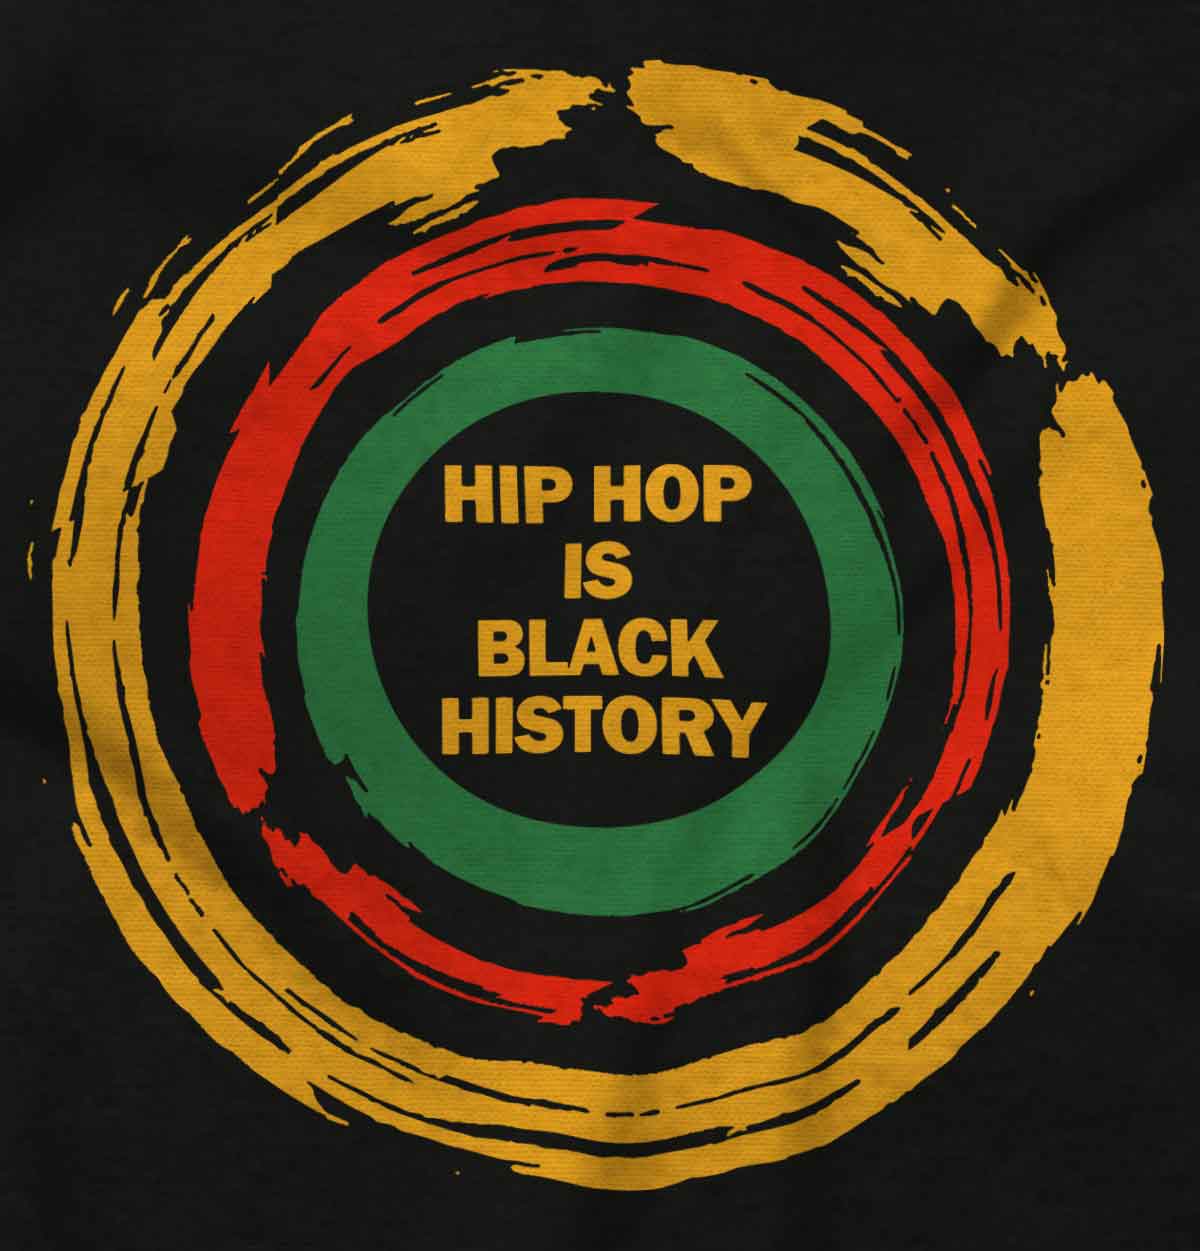 This artwork represents the rich history and significant contributions of African Americans in the form of Hip Hop. With its bold brush-painted rings, it emphasizes the deep impact of African-American culture.